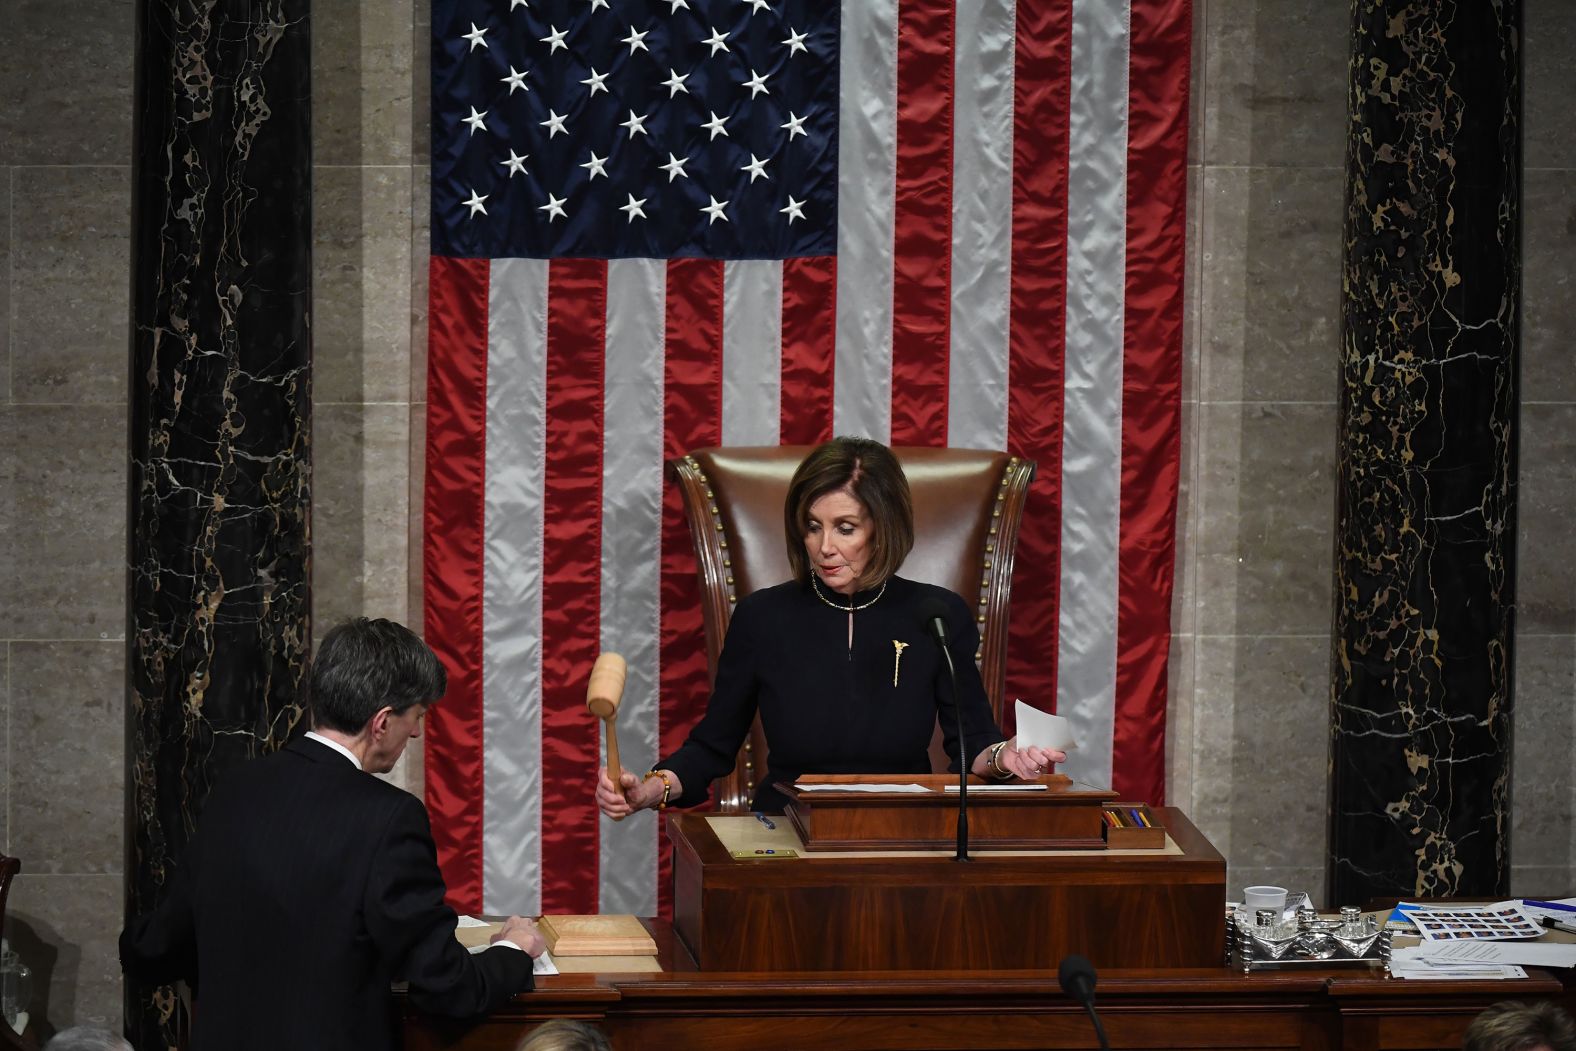 Pelosi bangs the gavel after the House <a href="index.php?page=&url=https%3A%2F%2Fwww.cnn.com%2F2019%2F12%2F18%2Fpolitics%2Fhouse-impeachment-vote%2Findex.html" target="_blank">voted to impeach President  Trump</a> in 2019. The House voted almost entirely along party lines to charge Trump with abuse of power and obstruction of Congress